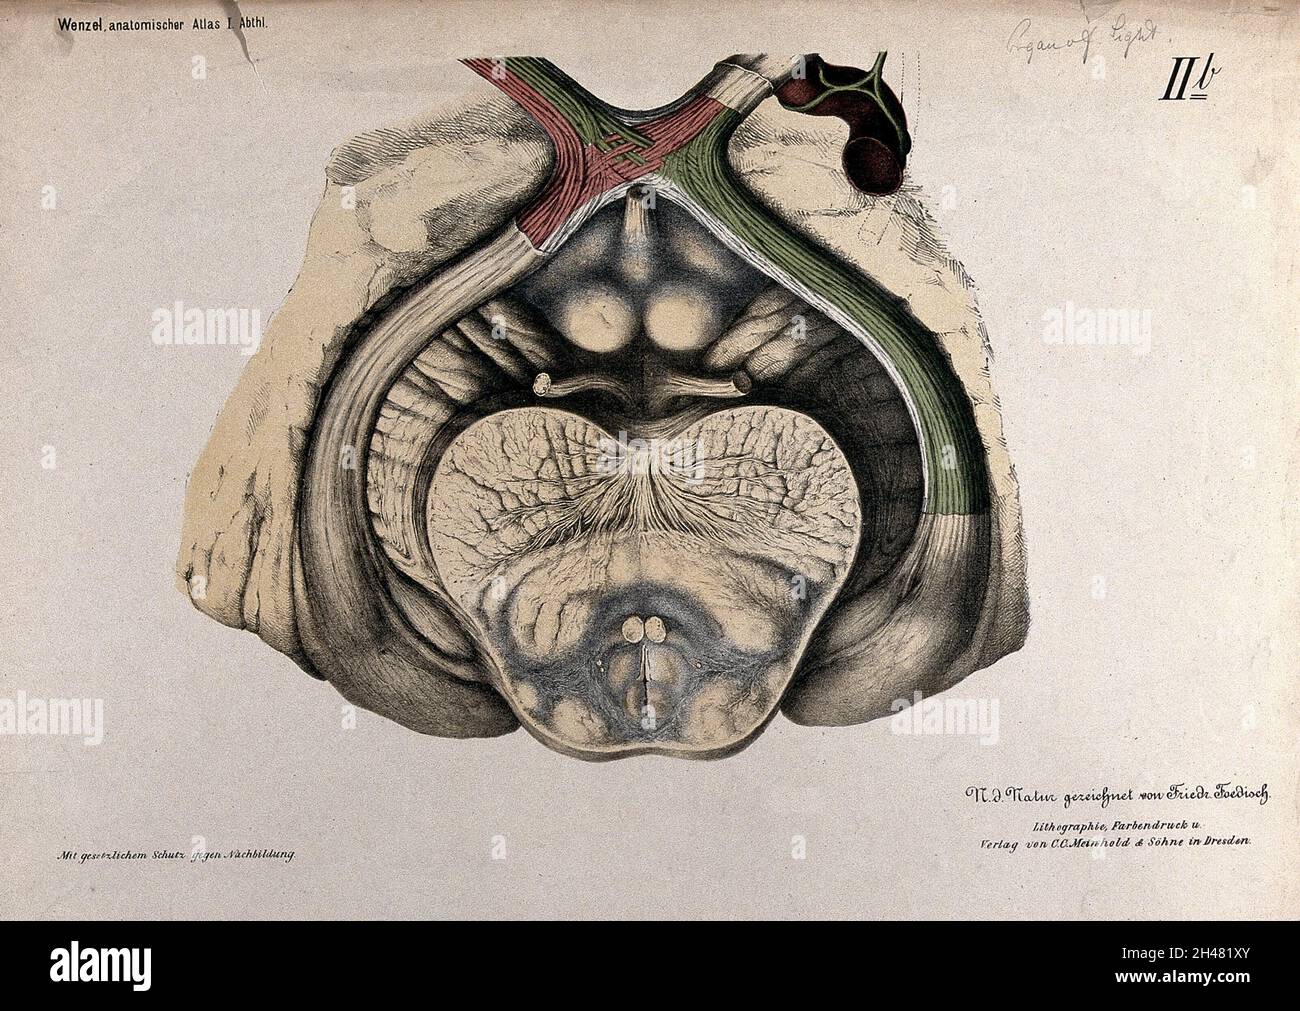 Anatomical section of the brain showing the optic chiasma. Colour lithograph by F. Foedisch, 1875. Stock Photo